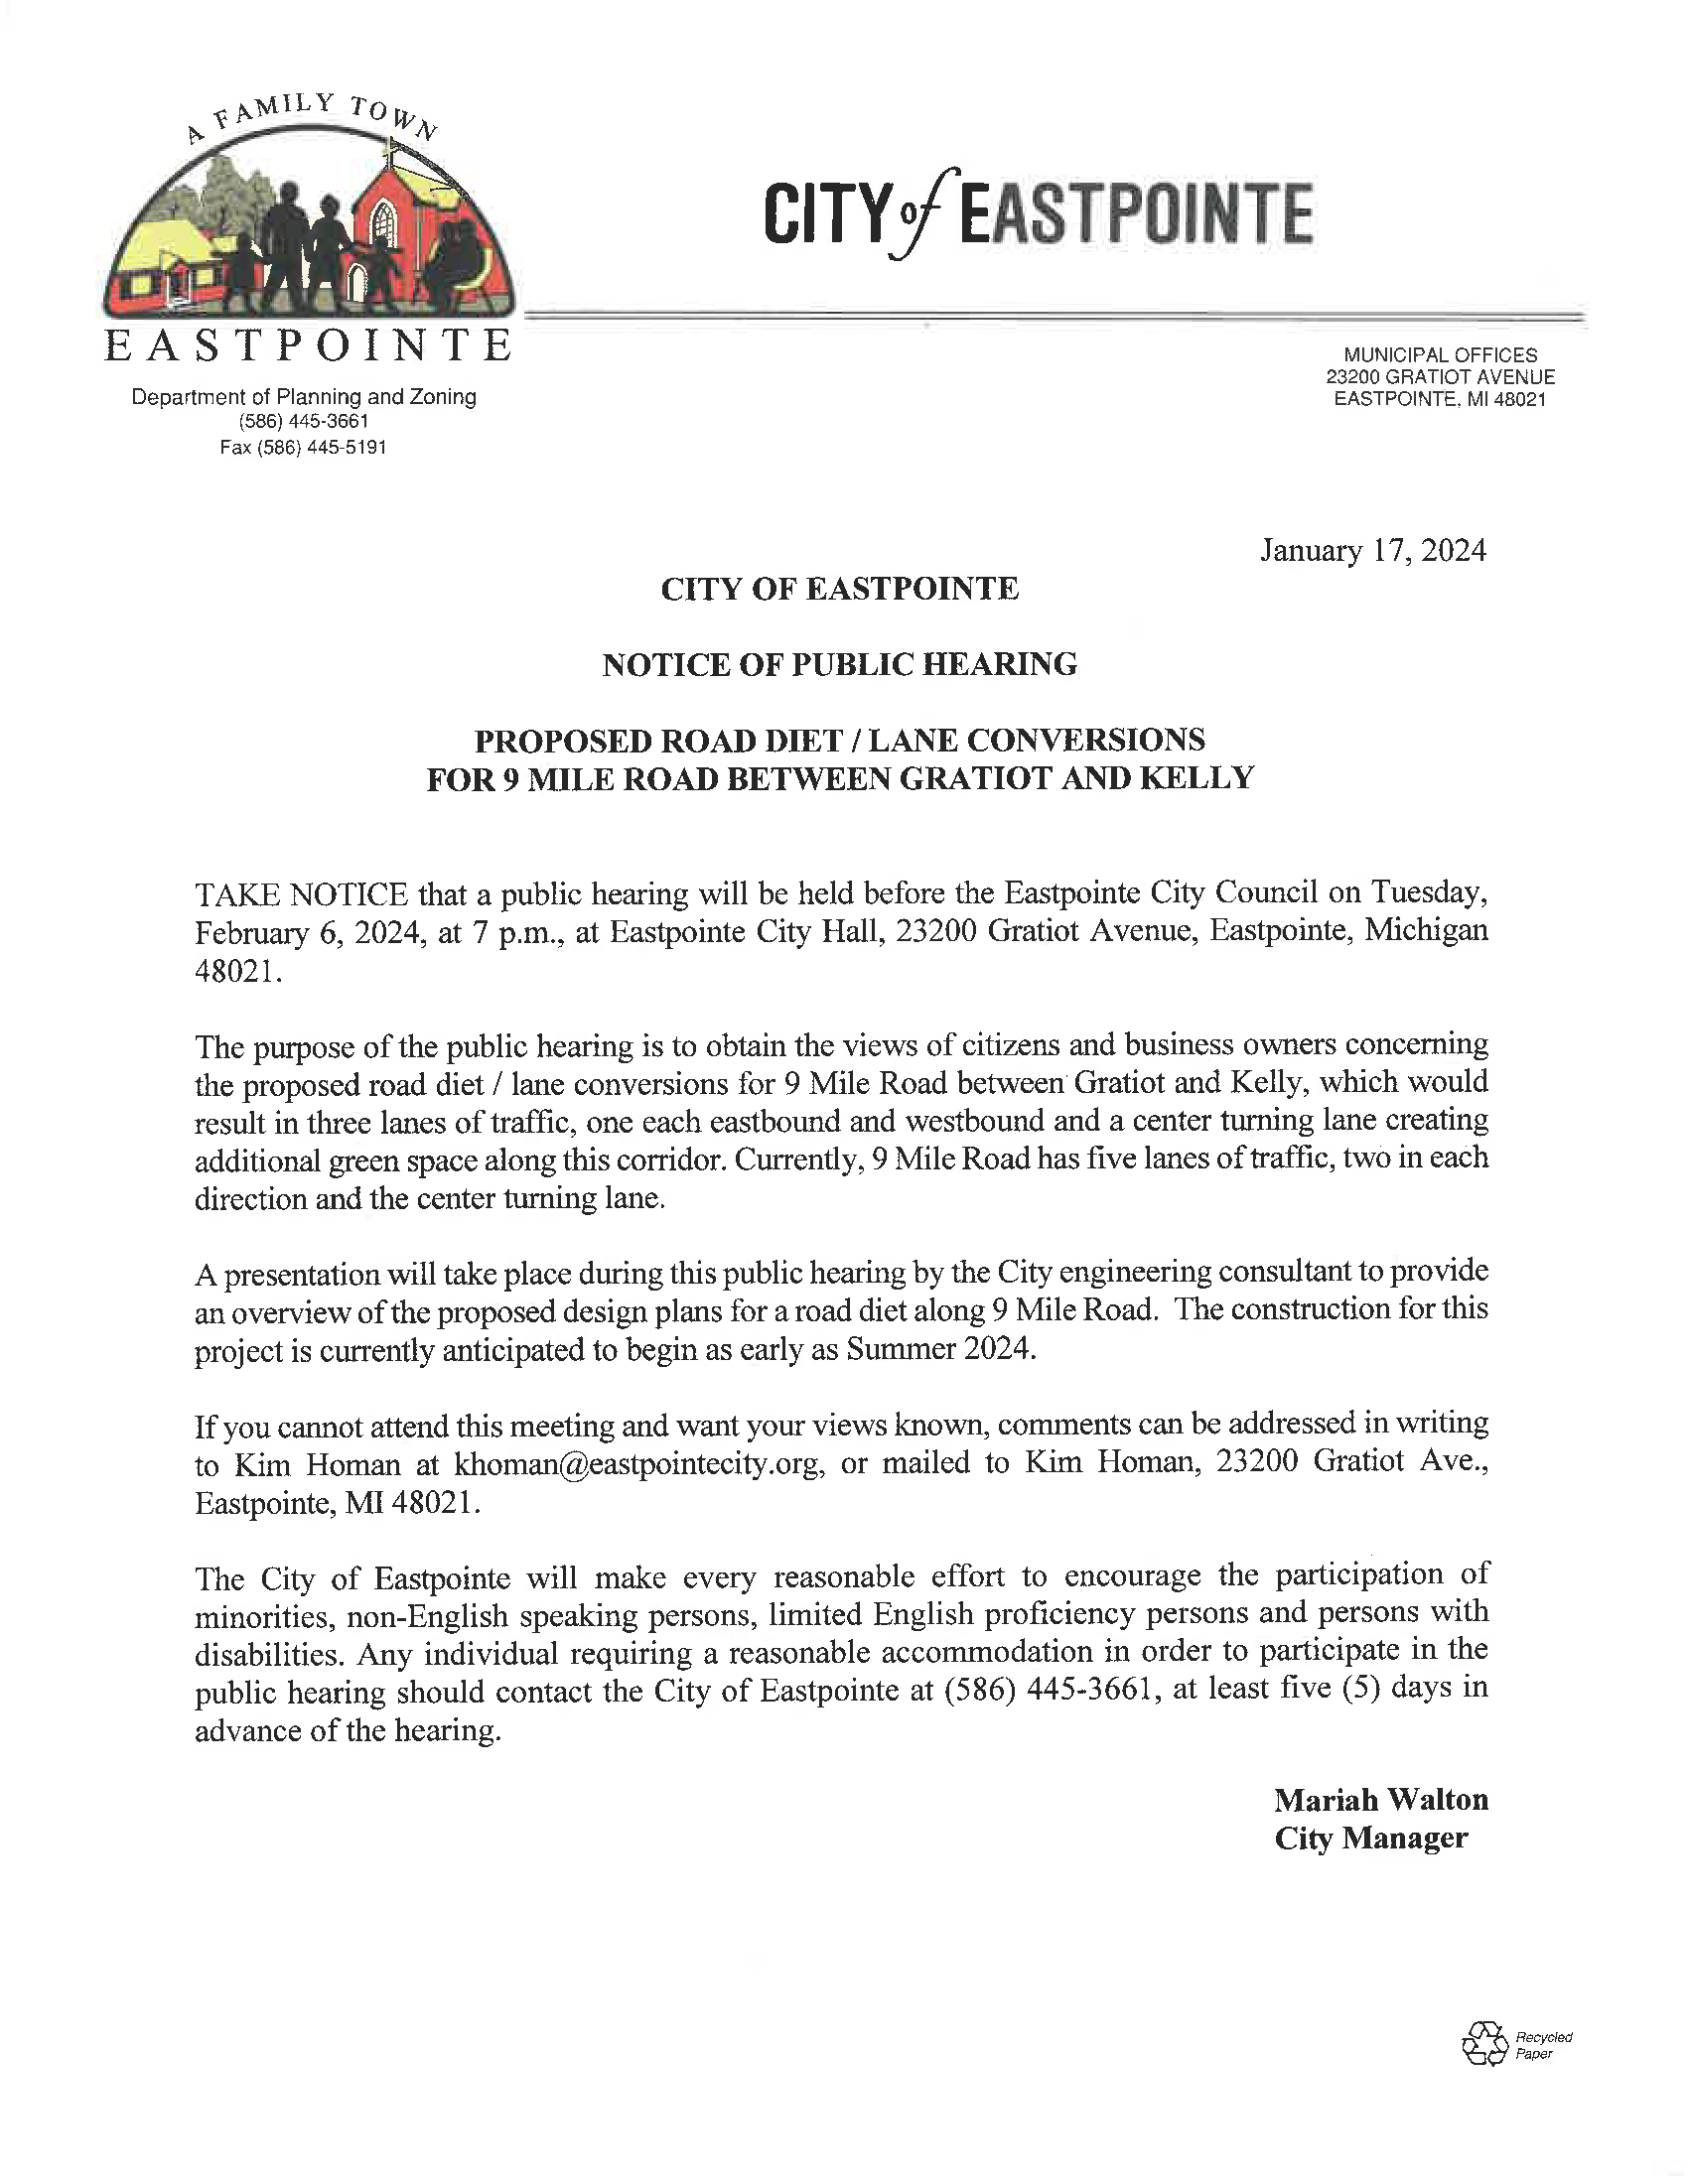 Eastpointe Proposed Road Diet Notice to Residents (002)